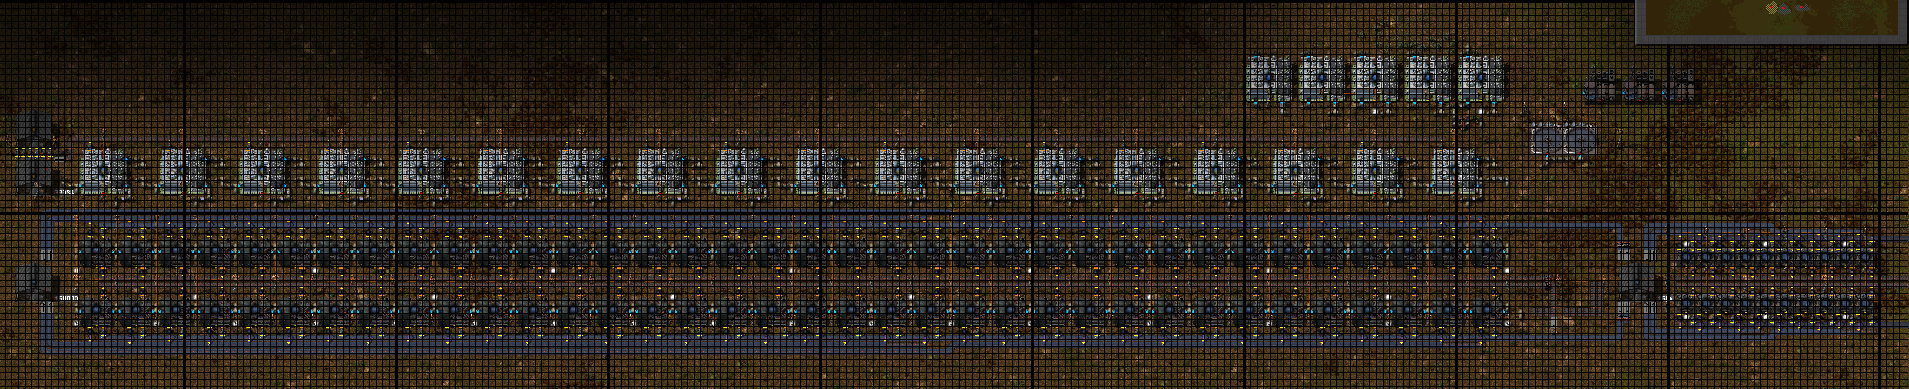 Hydro plant 2.png